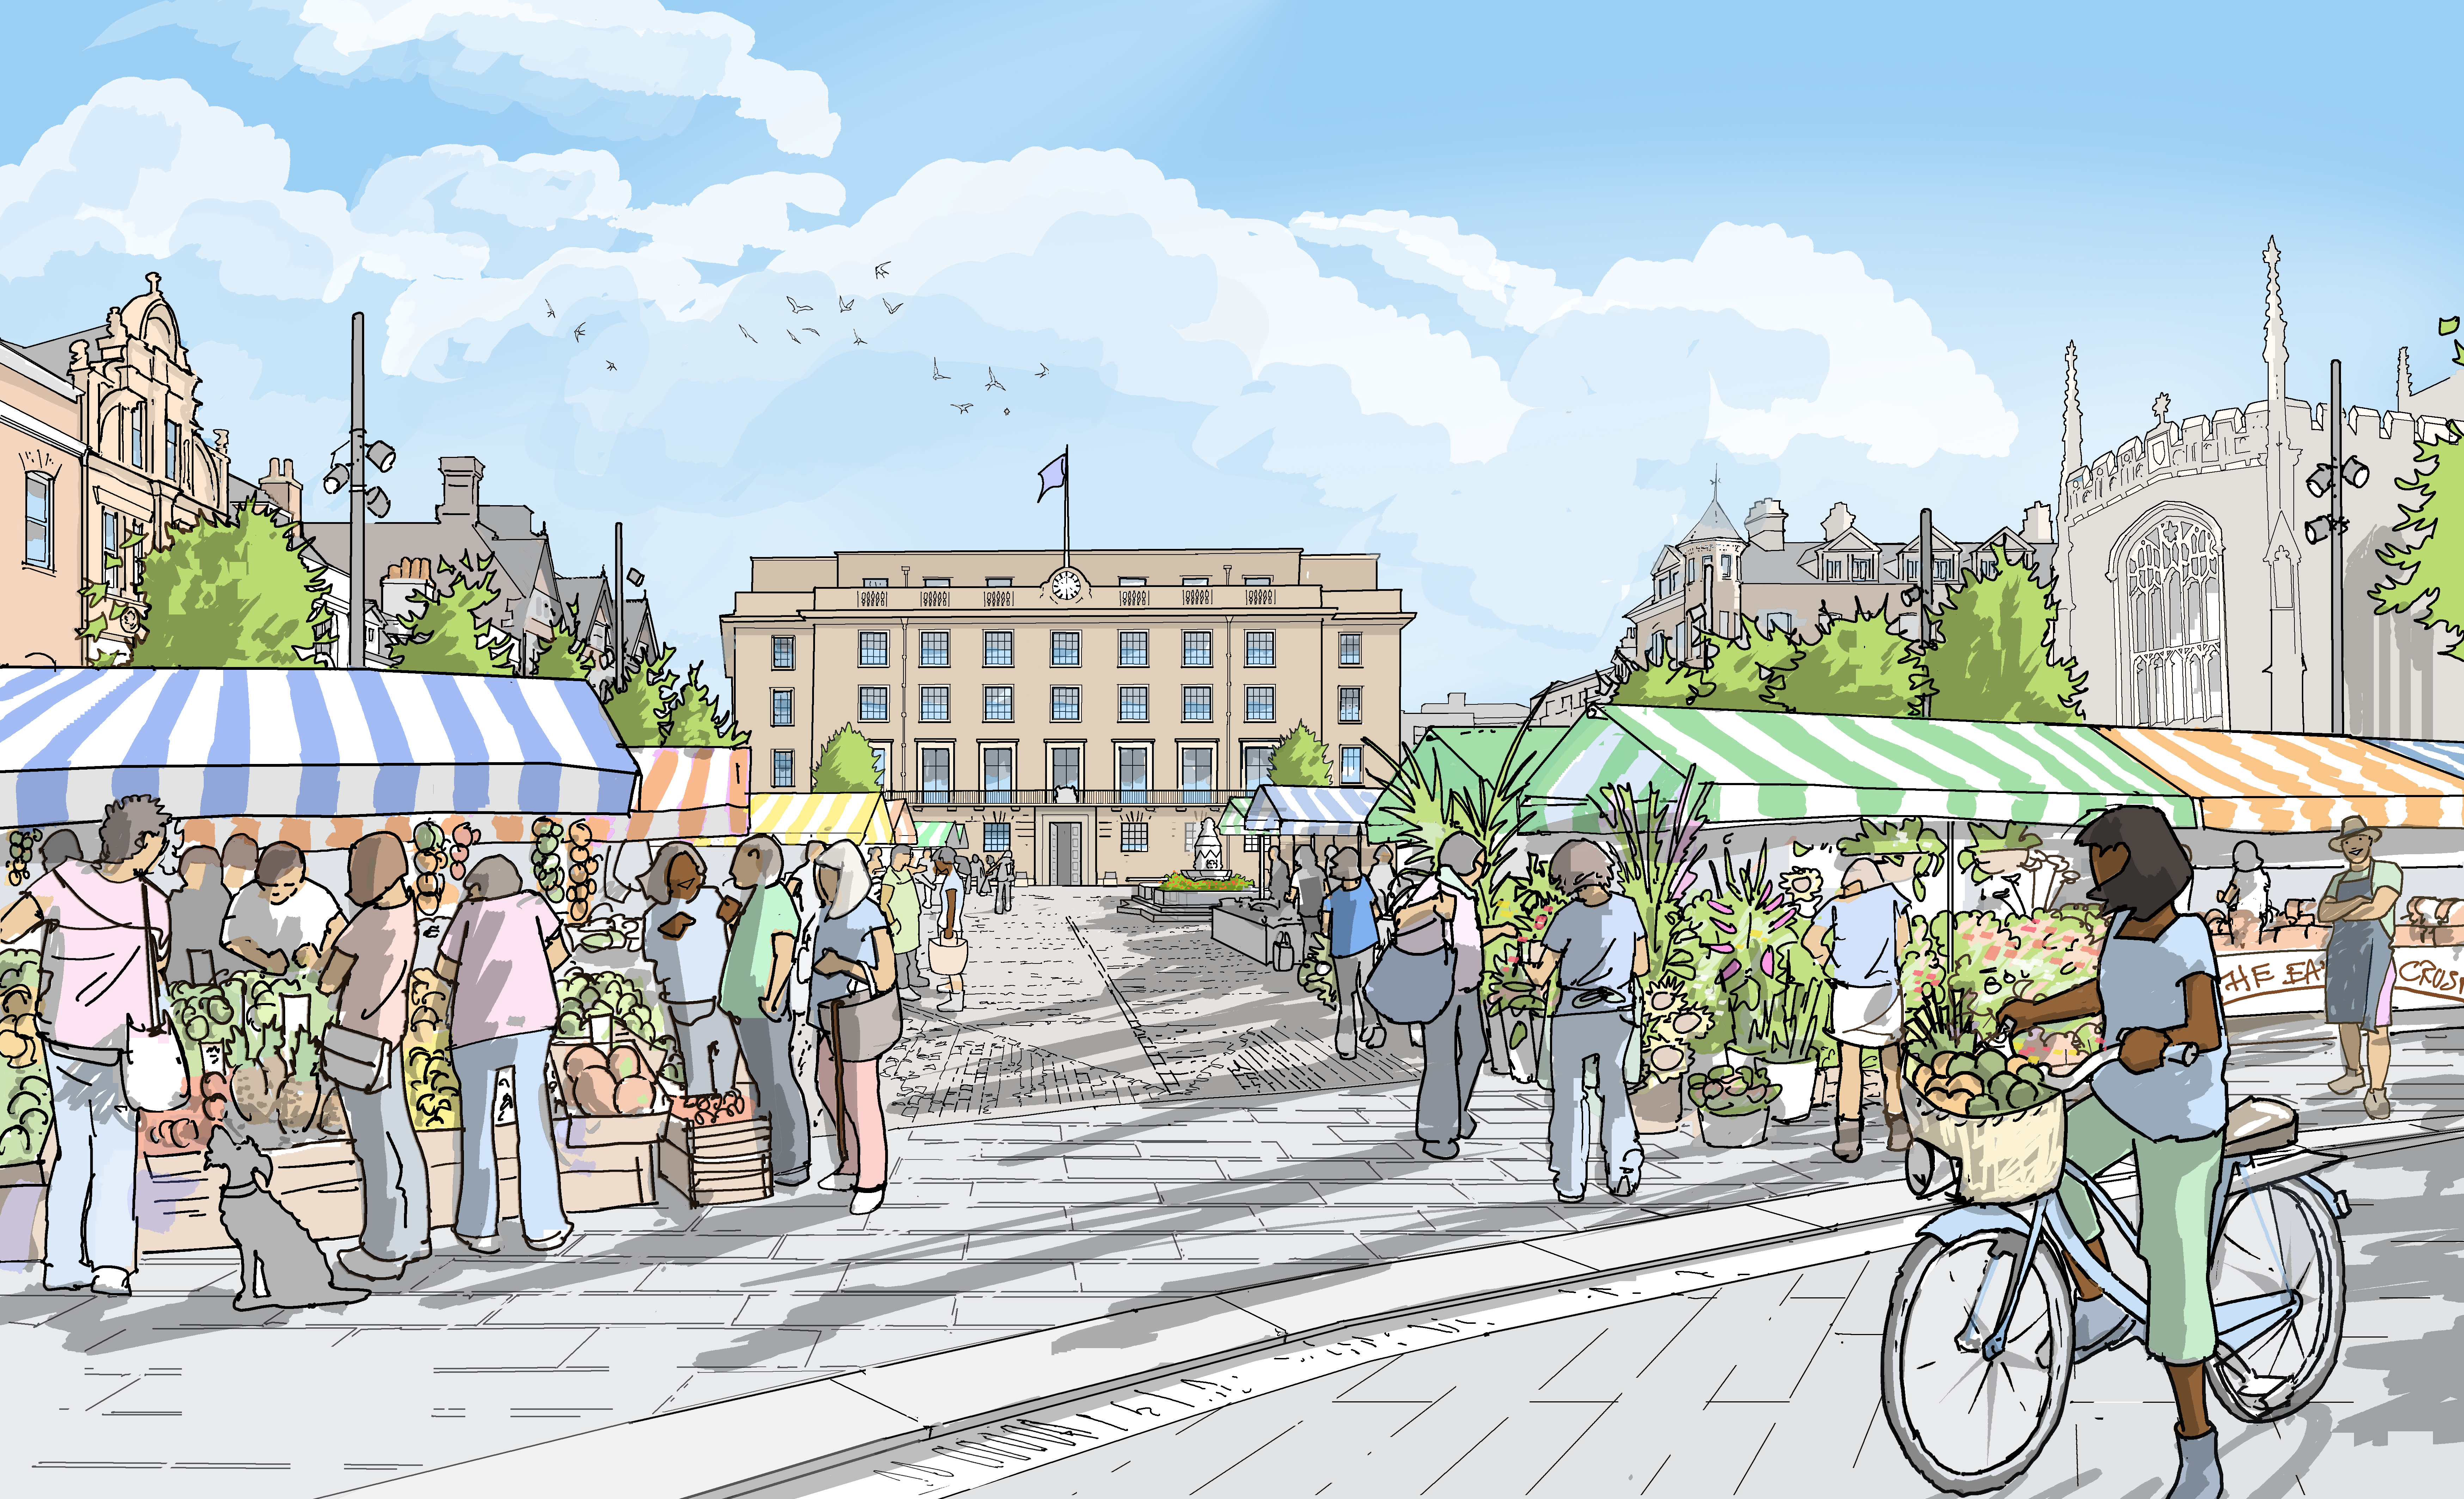 Illustrated view of the market square with a view of the Guildhall in the background